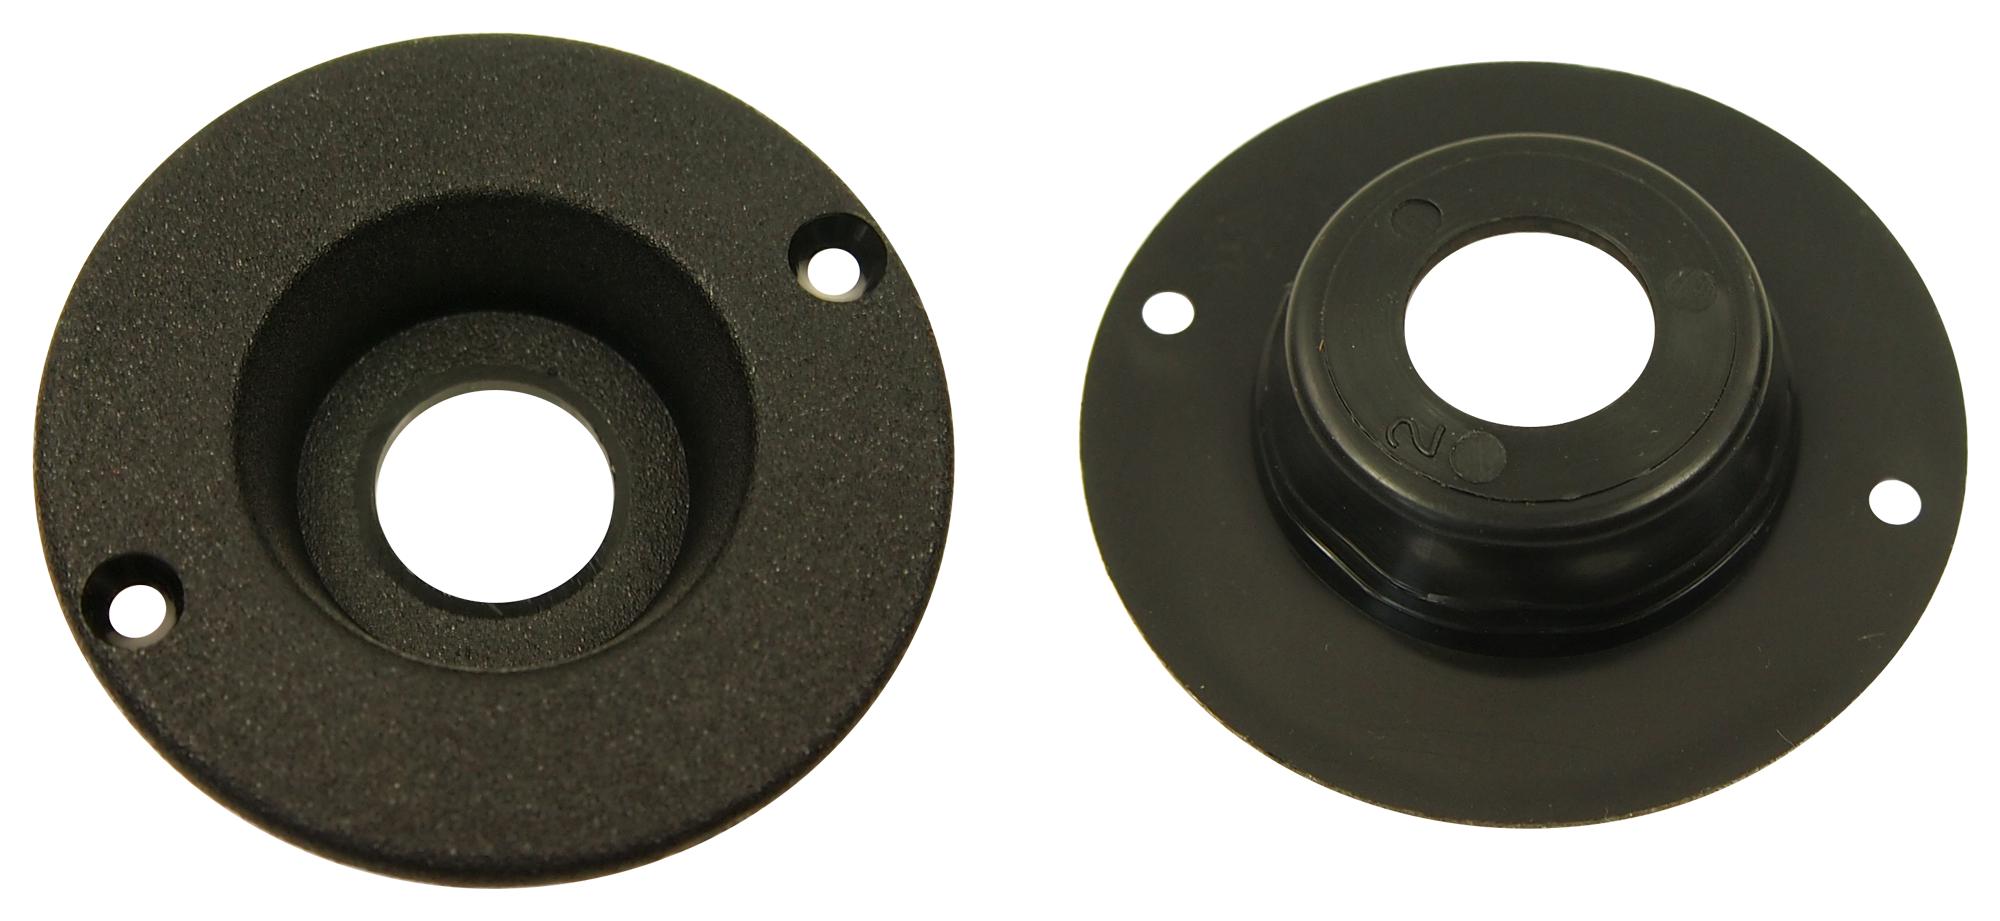 CL1396 RECESS PLATE, 6.35MM JACK SOCKET, BLACK CLIFF ELECTRONIC COMPONENTS